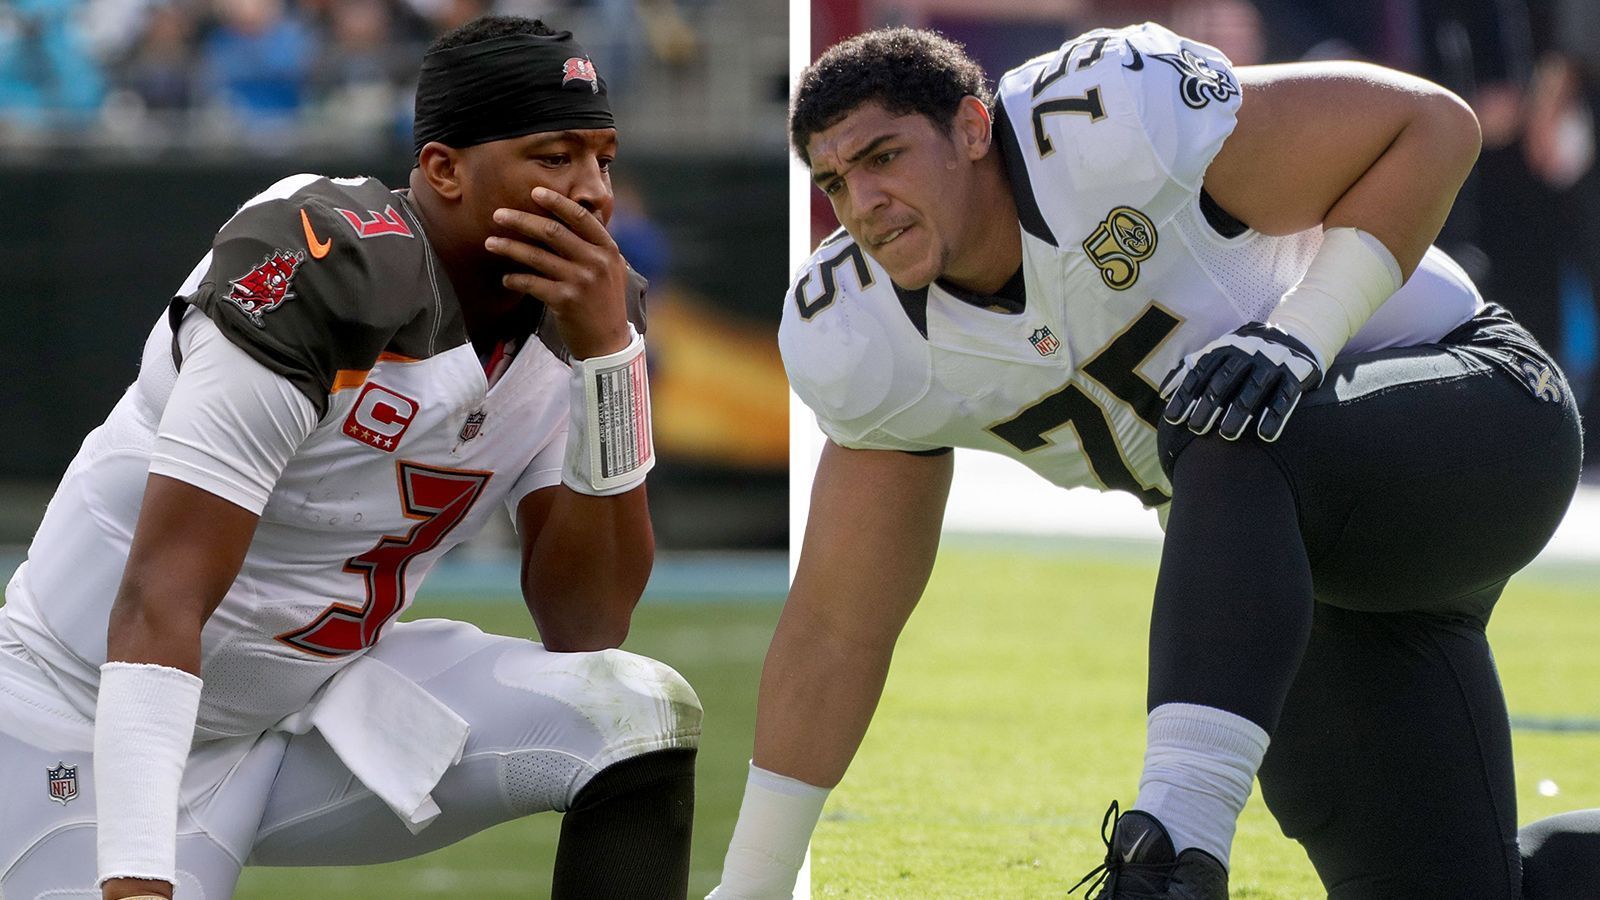 
                <strong>NFL Draft 2015</strong><br>
                &#x2022; Nummer-1-Pick: Quarterback <strong>Jameis Winston</strong> – 1x Pro Bowl<br>&#x2022; Nummer-13-Pick: Guard <strong>Andrus Peat</strong> – 3x Pro Bowl<br>
              